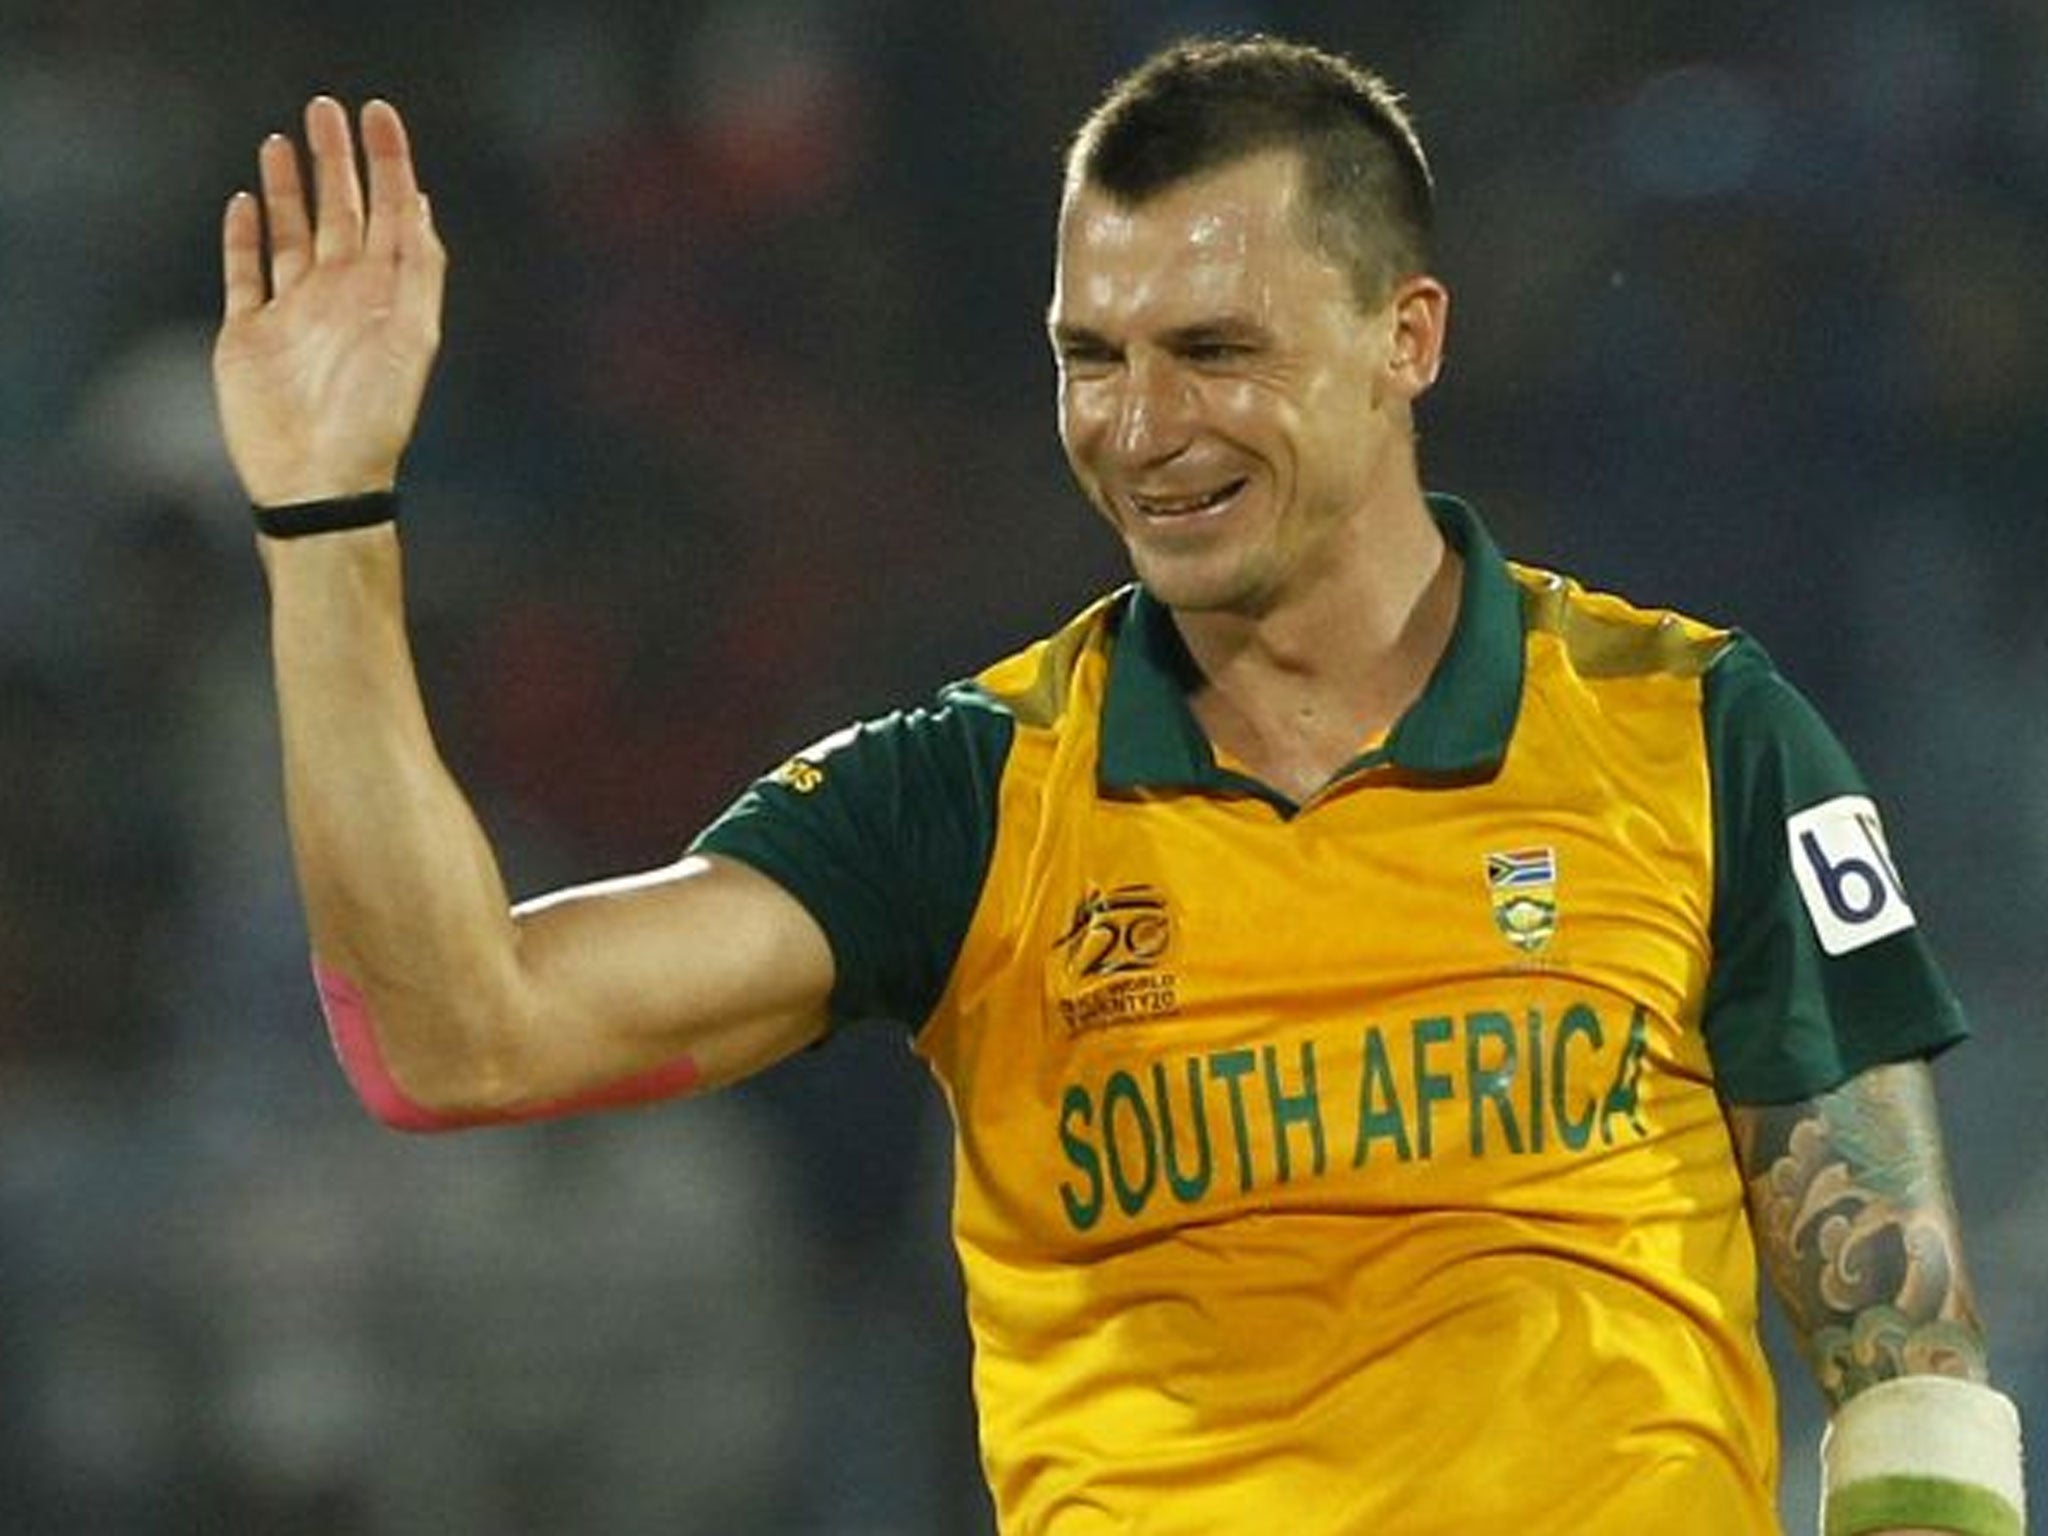 Dale Steyn denied New Zealand victory as three wickets fell in a sensational final over in Chittagong